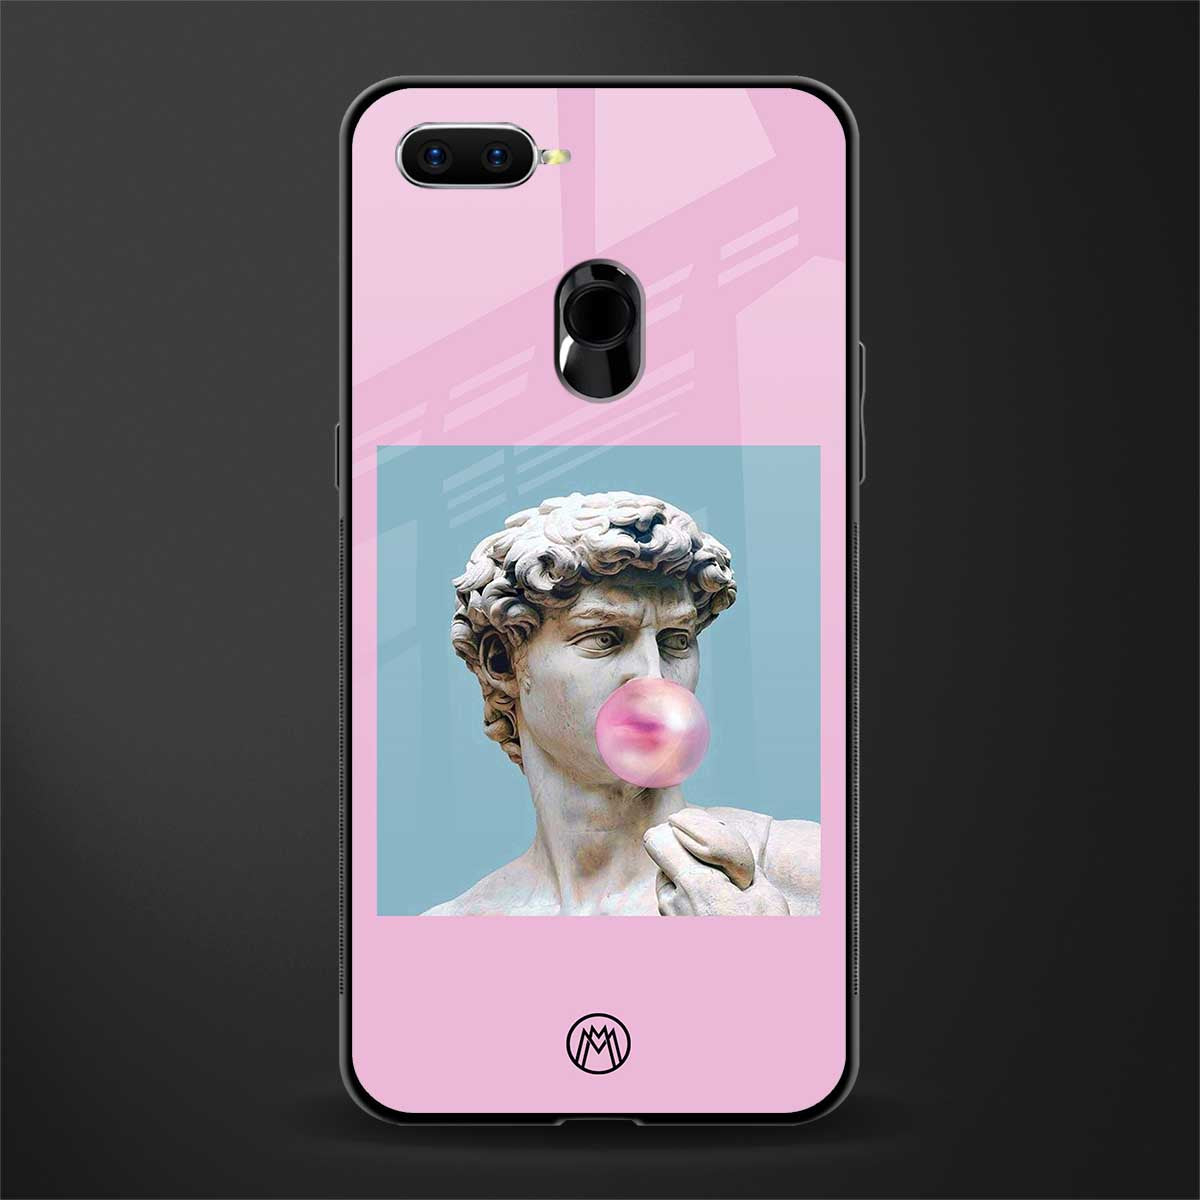 dope david michelangelo glass case for oppo a7 image